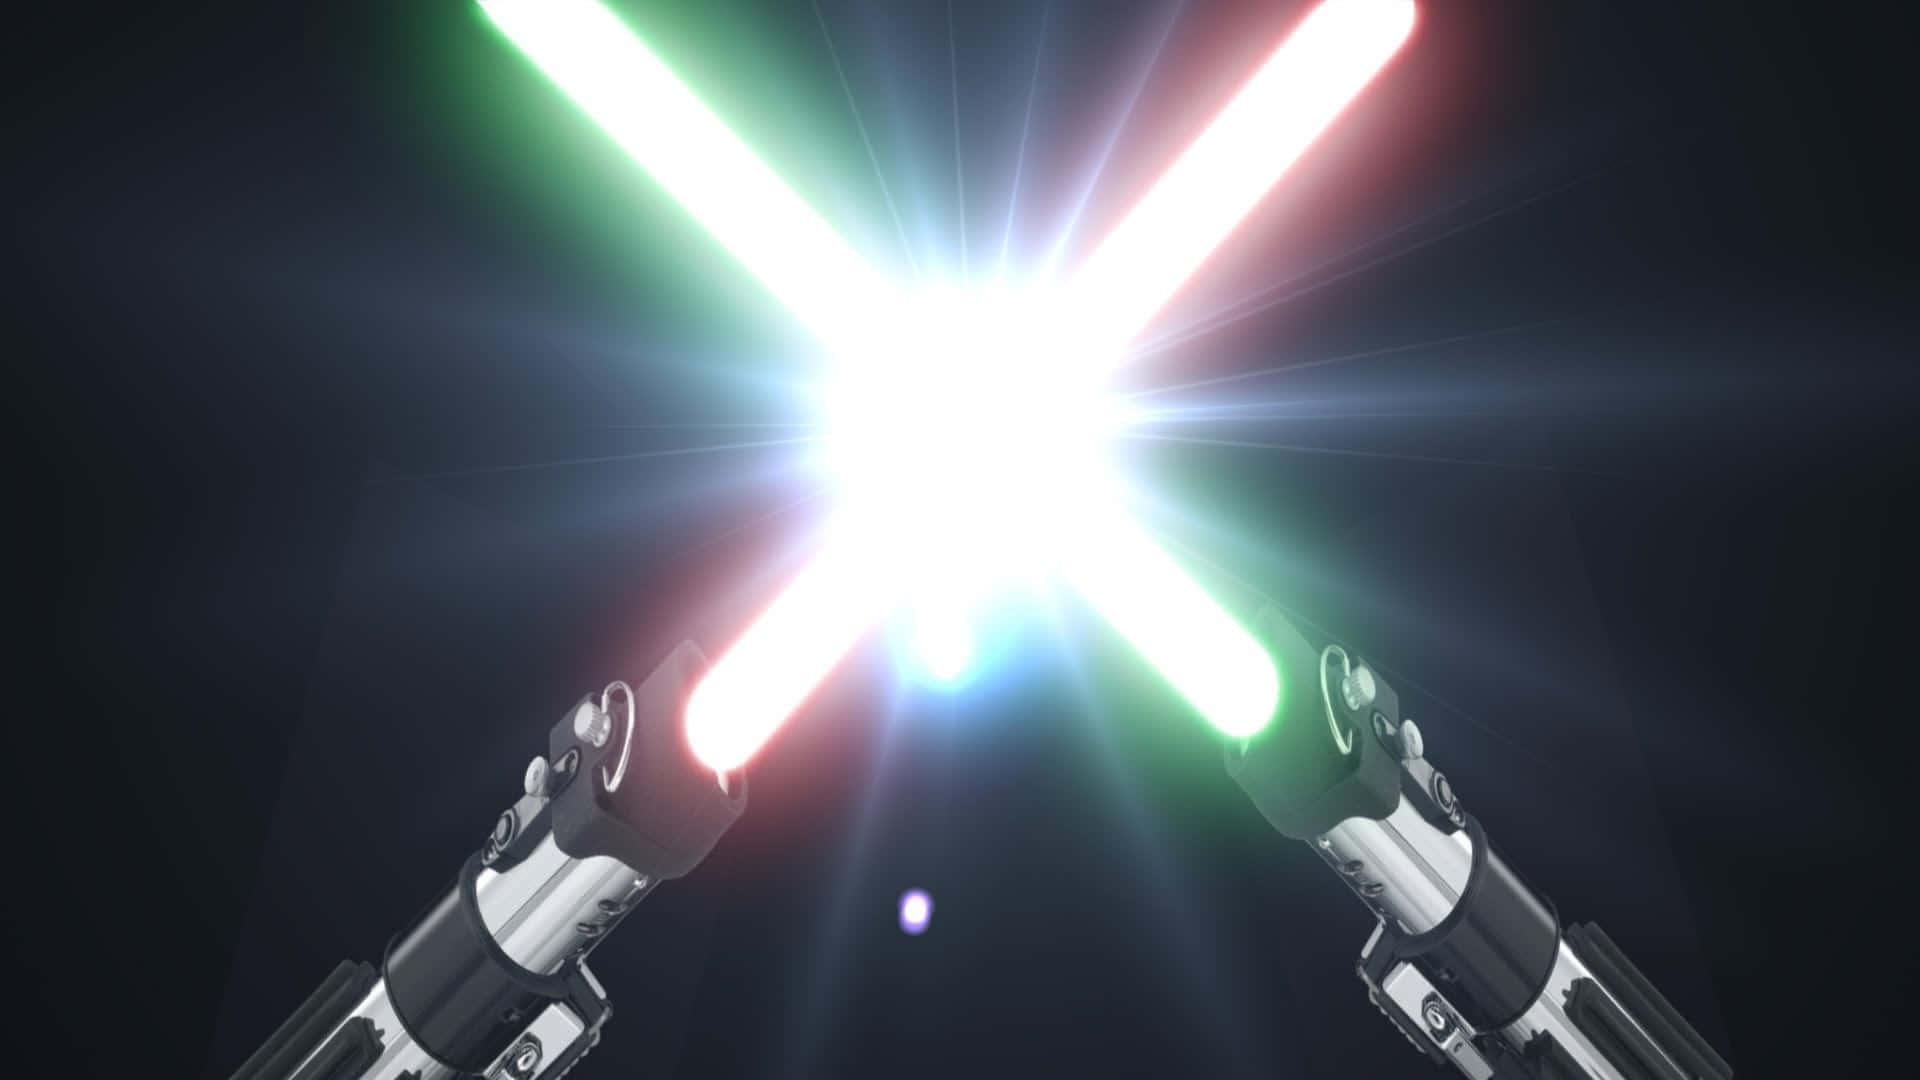 Jedi Knights Engaged in High-Stakes Lightsaber Duel Wallpaper